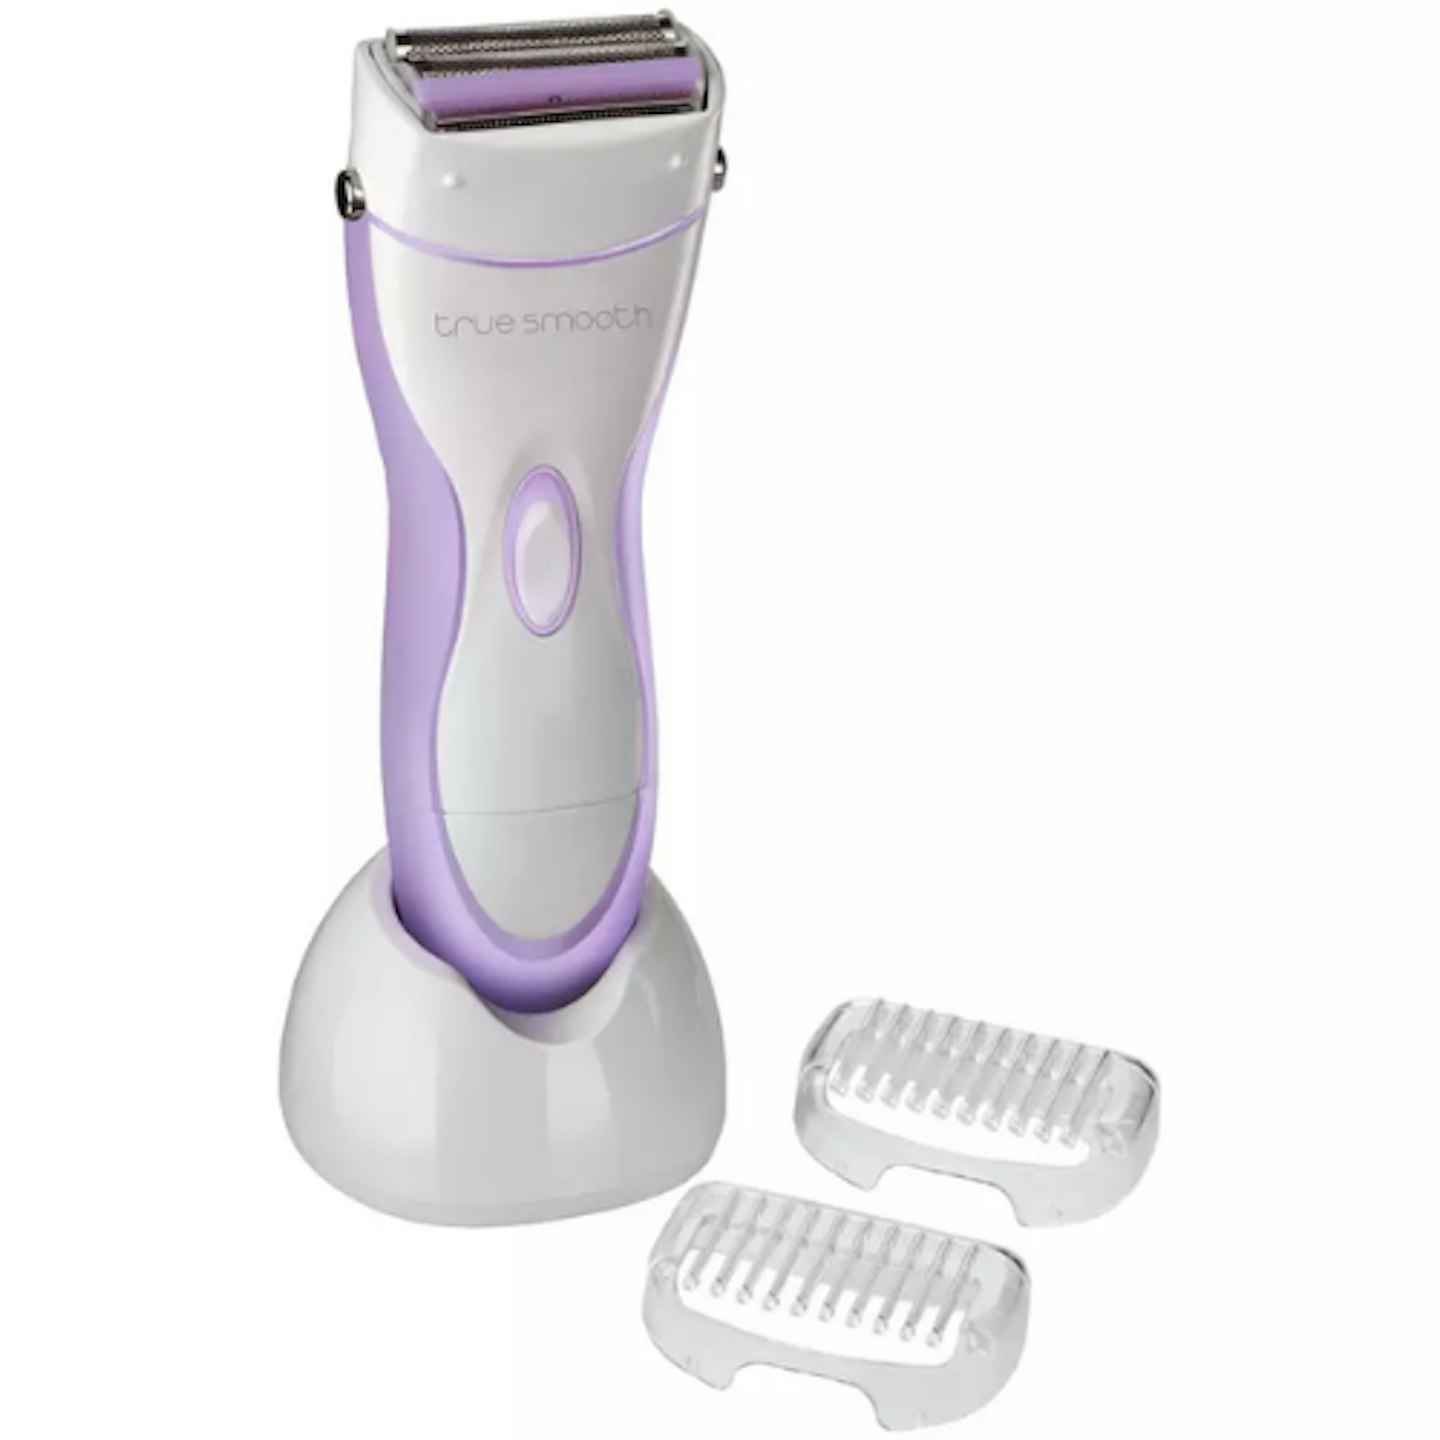 BaByliss_20TrueSmooth_20Wet_20And_20Dry_20Cordless_20Lady_20Shaver.png